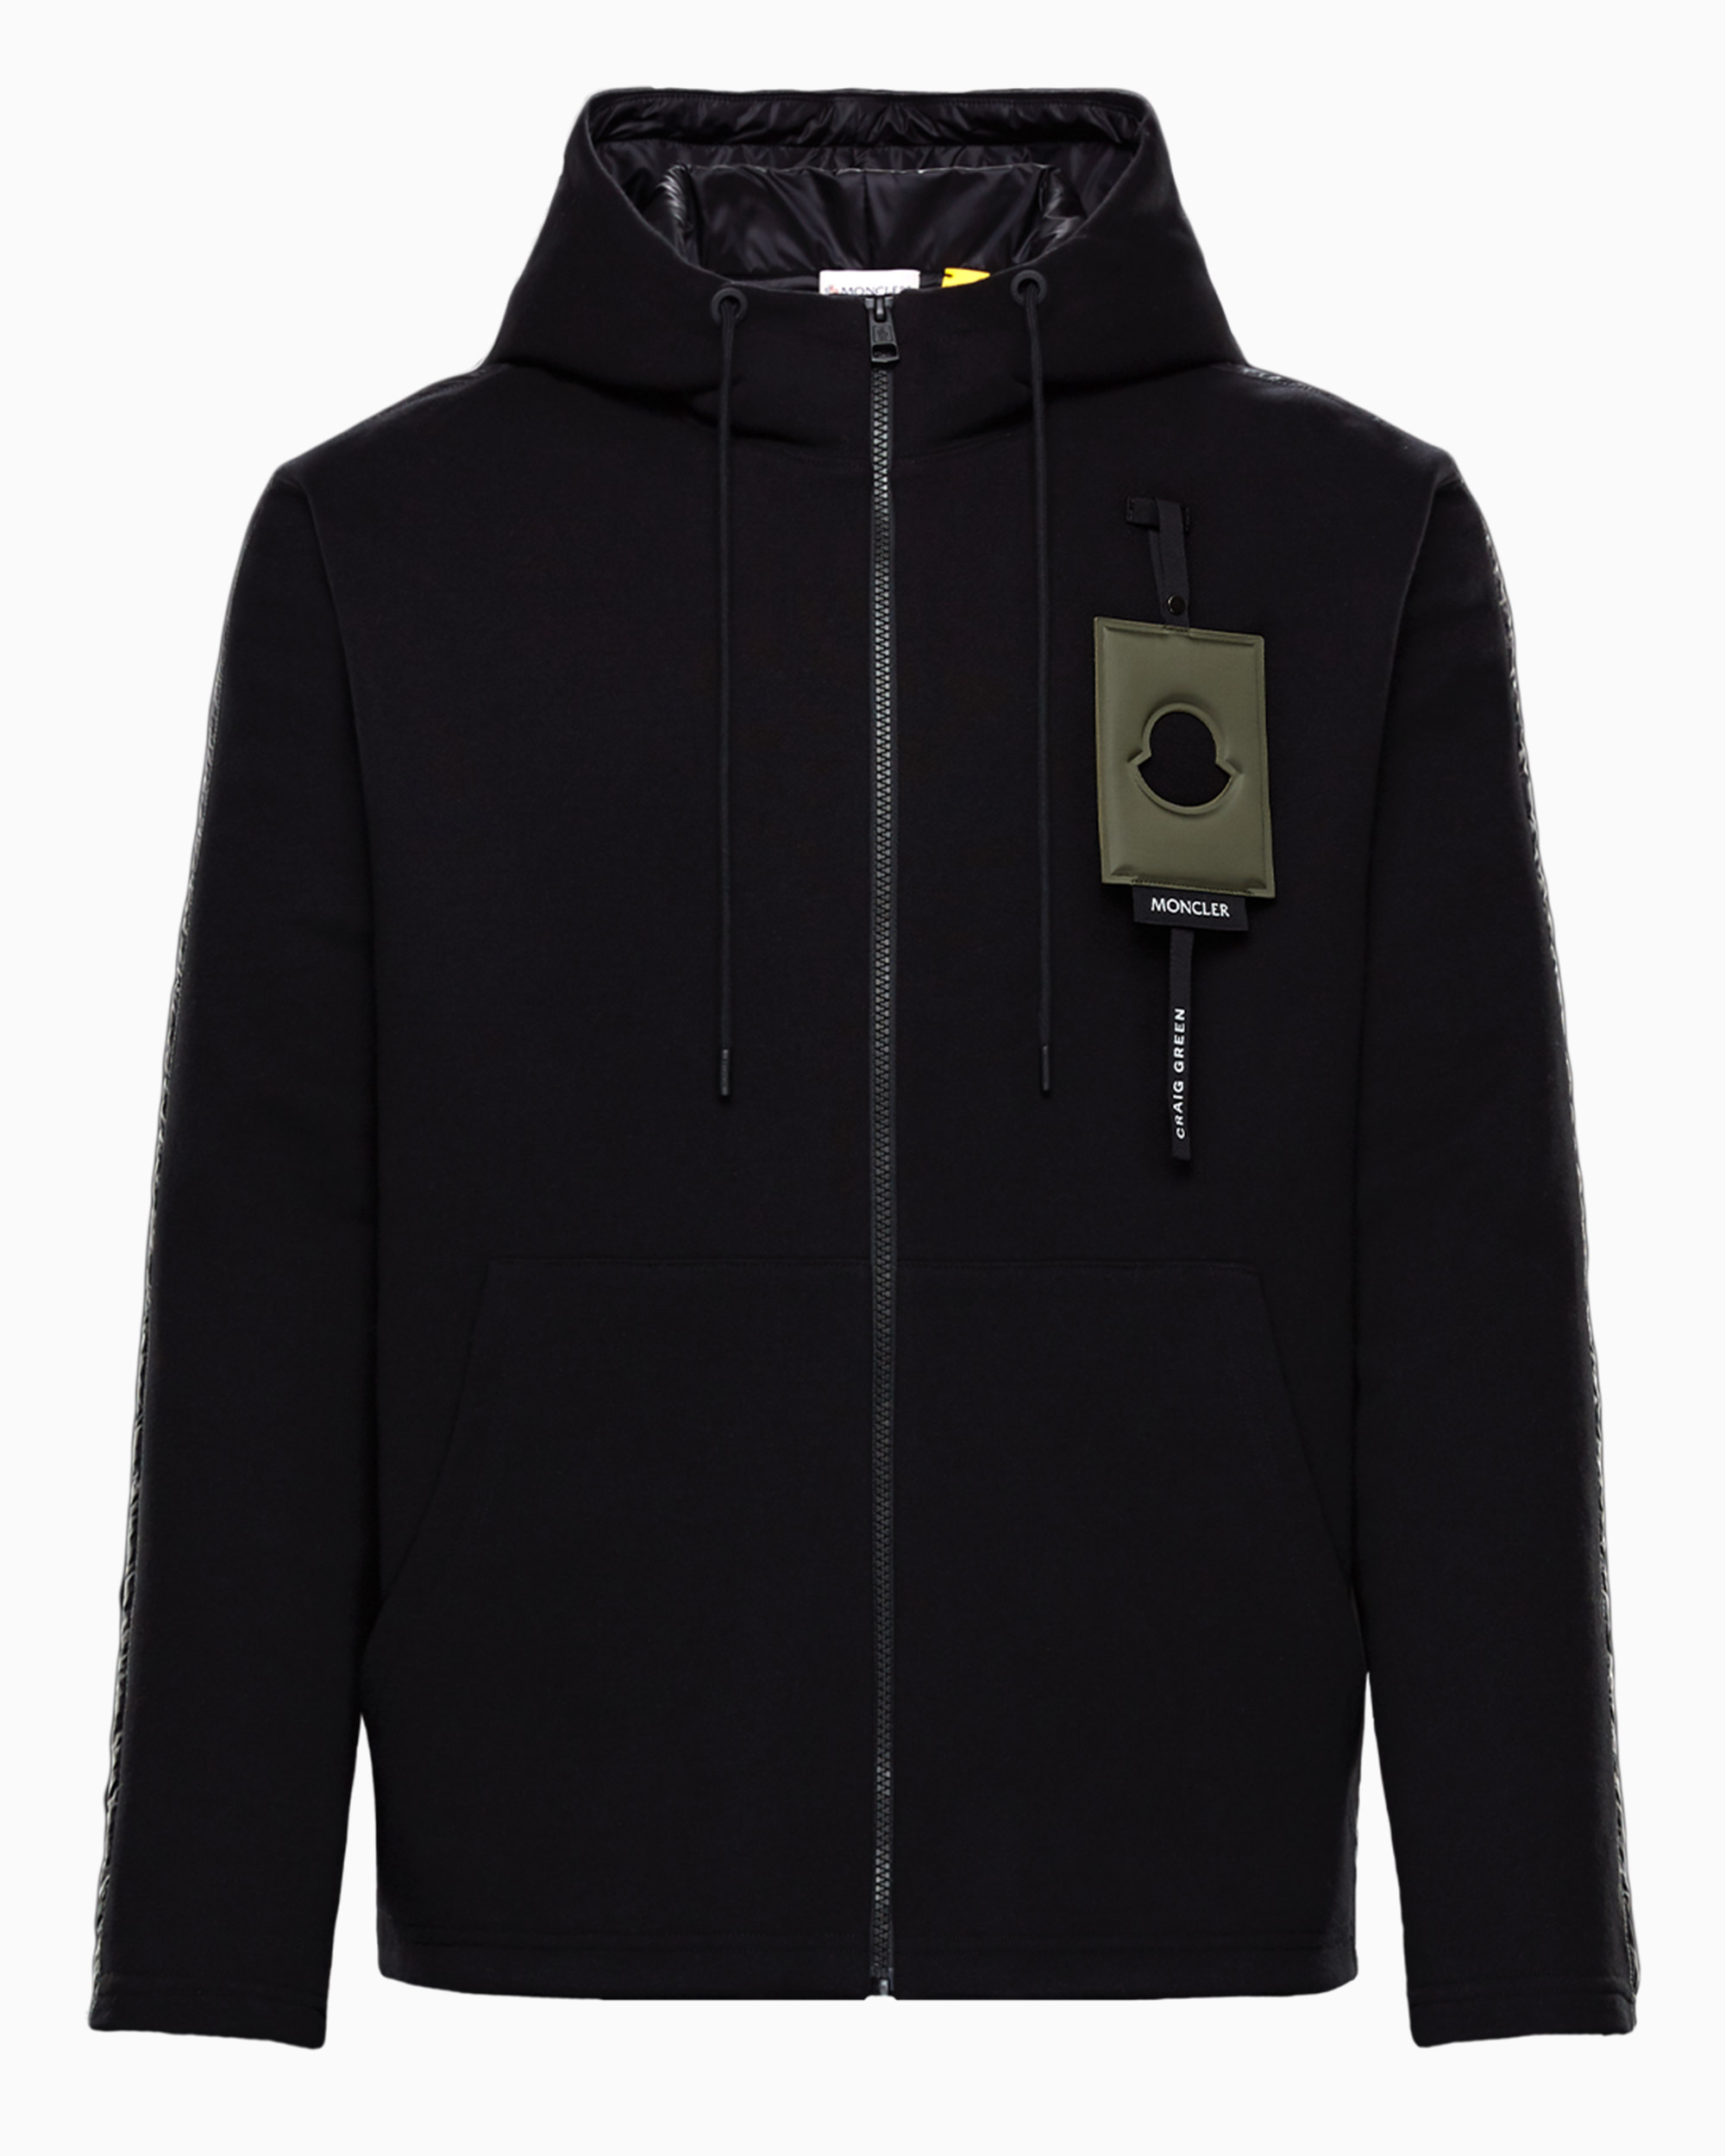 Hooded Jacket by Moncler Genius